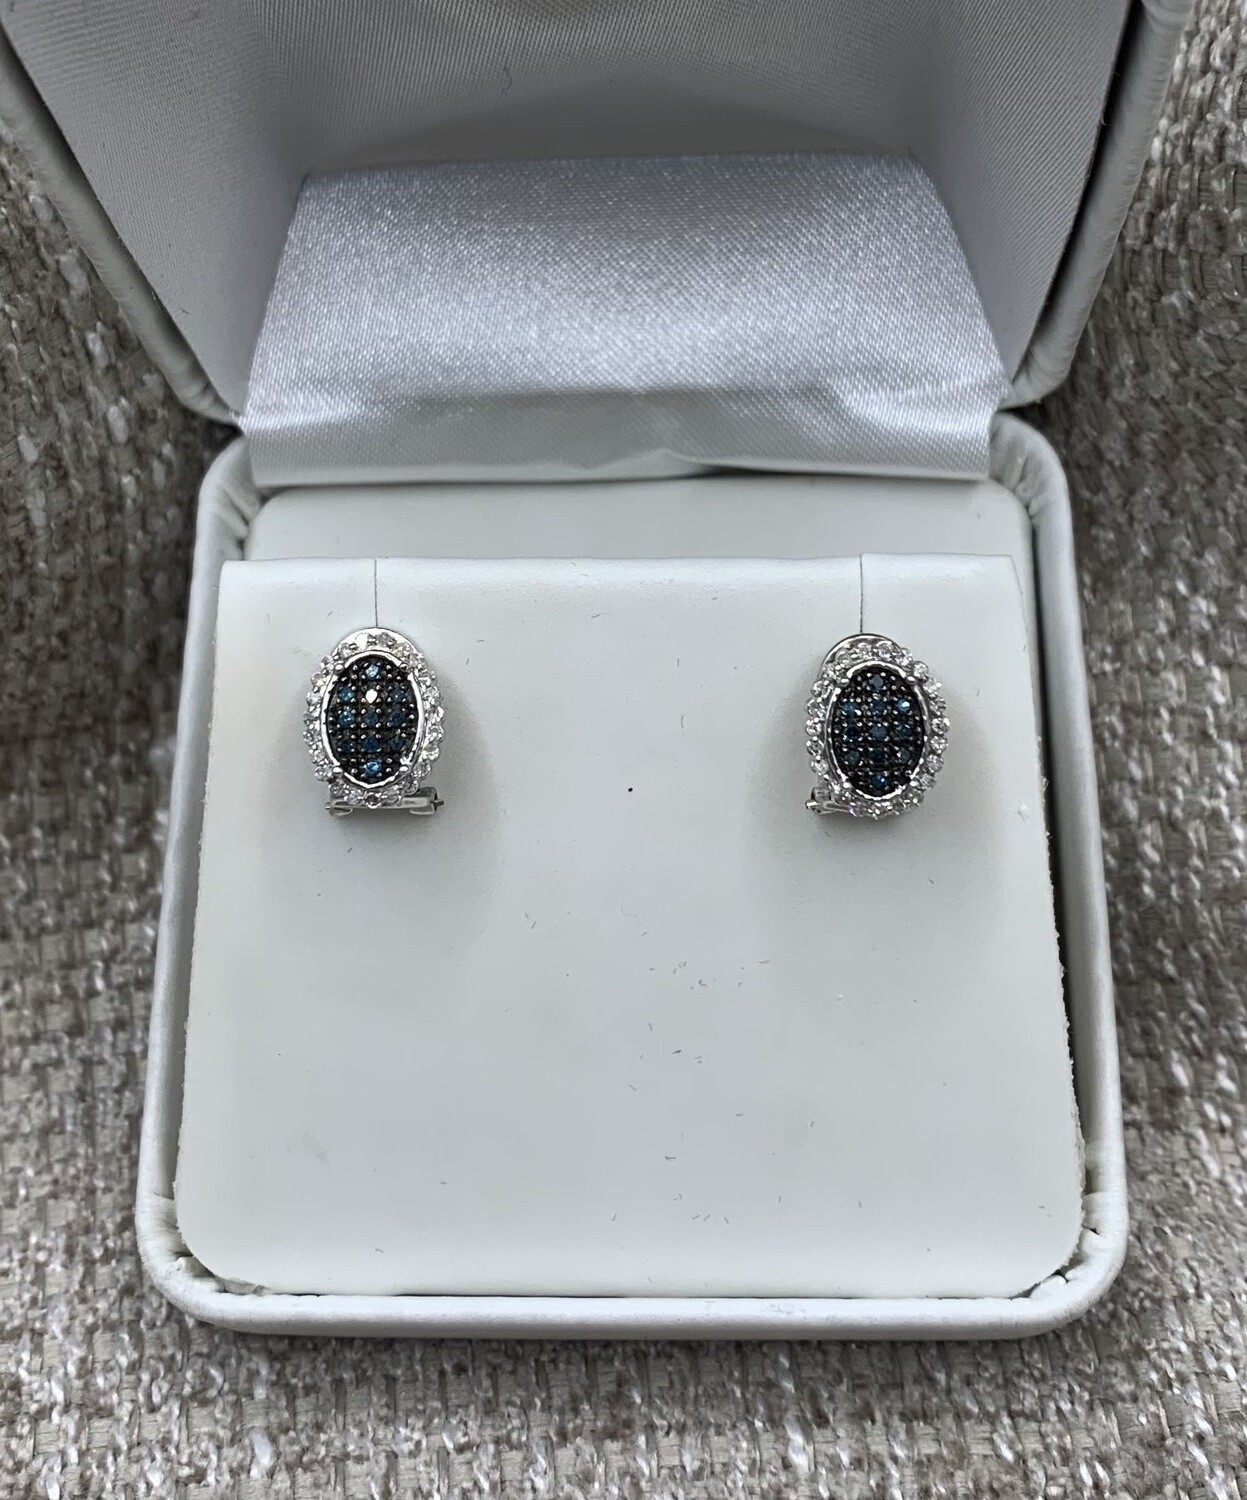 Blue and White Diamond Earrings (Oval Shape Blue Cluster) with a White Diamond Halo 34 Pts. set in 10 Kt. White or Yellow Gold (Your Choice) with Omega Style Backs